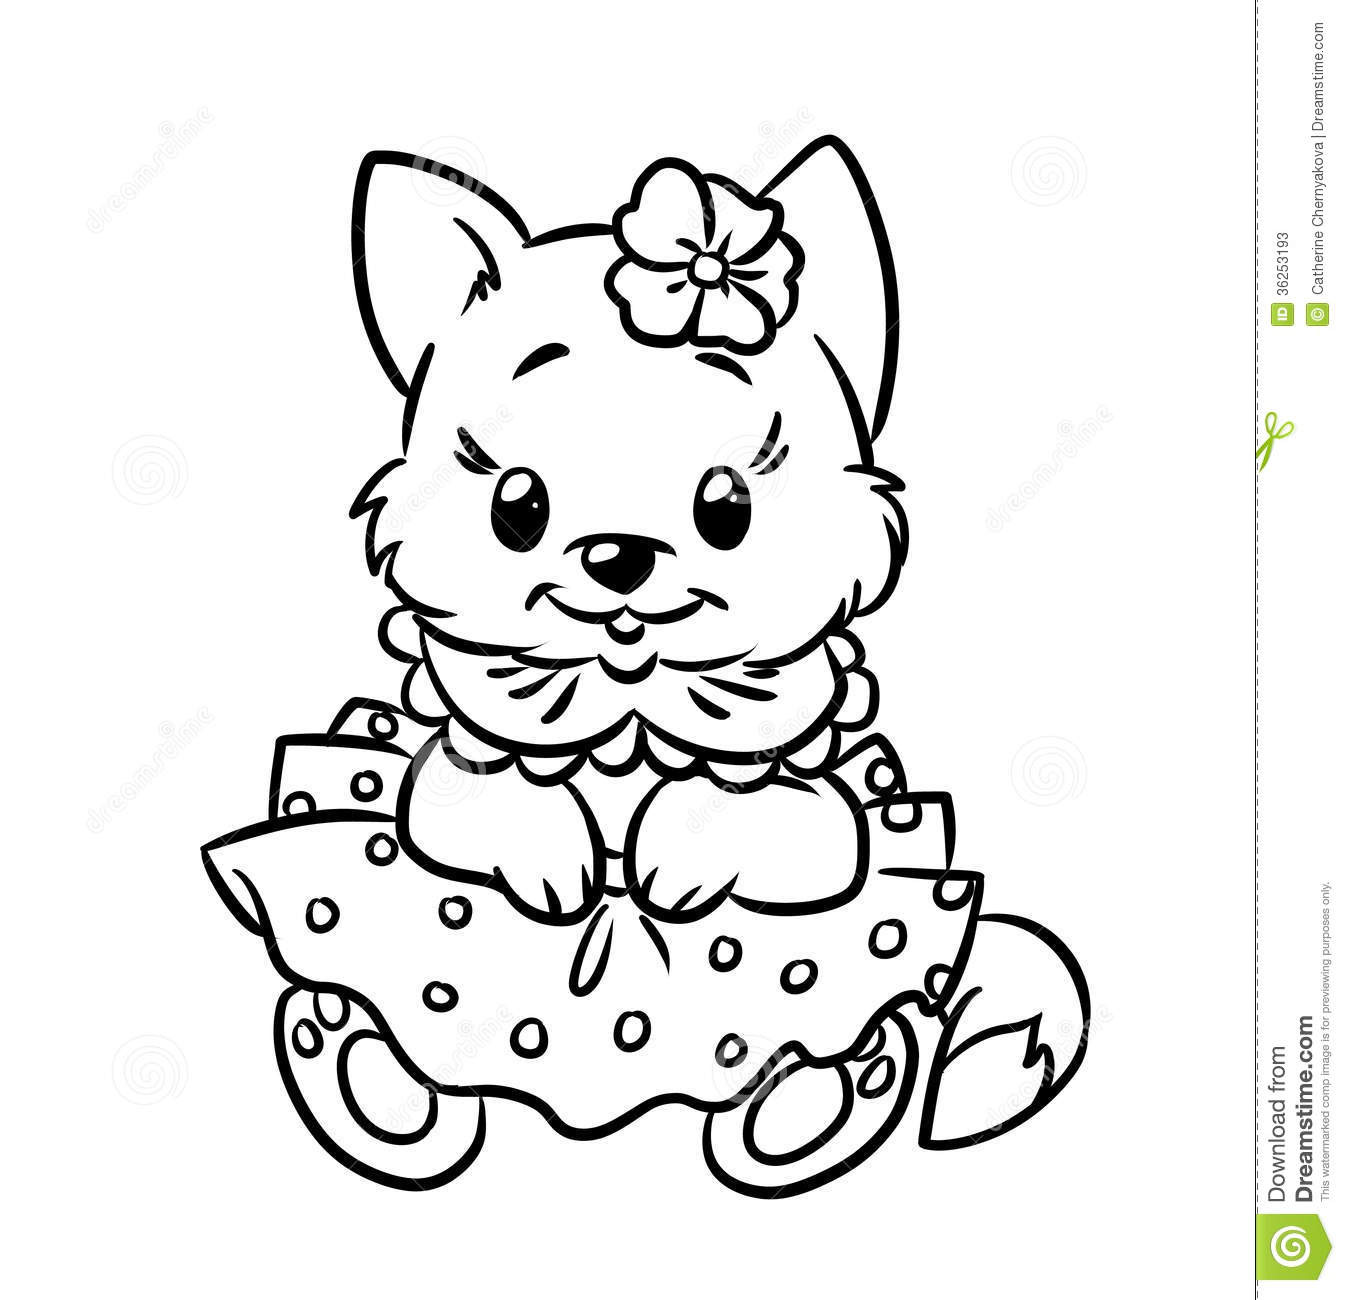 Baby Cat Coloring Pages
 Baby kitten coloring pages stock illustration